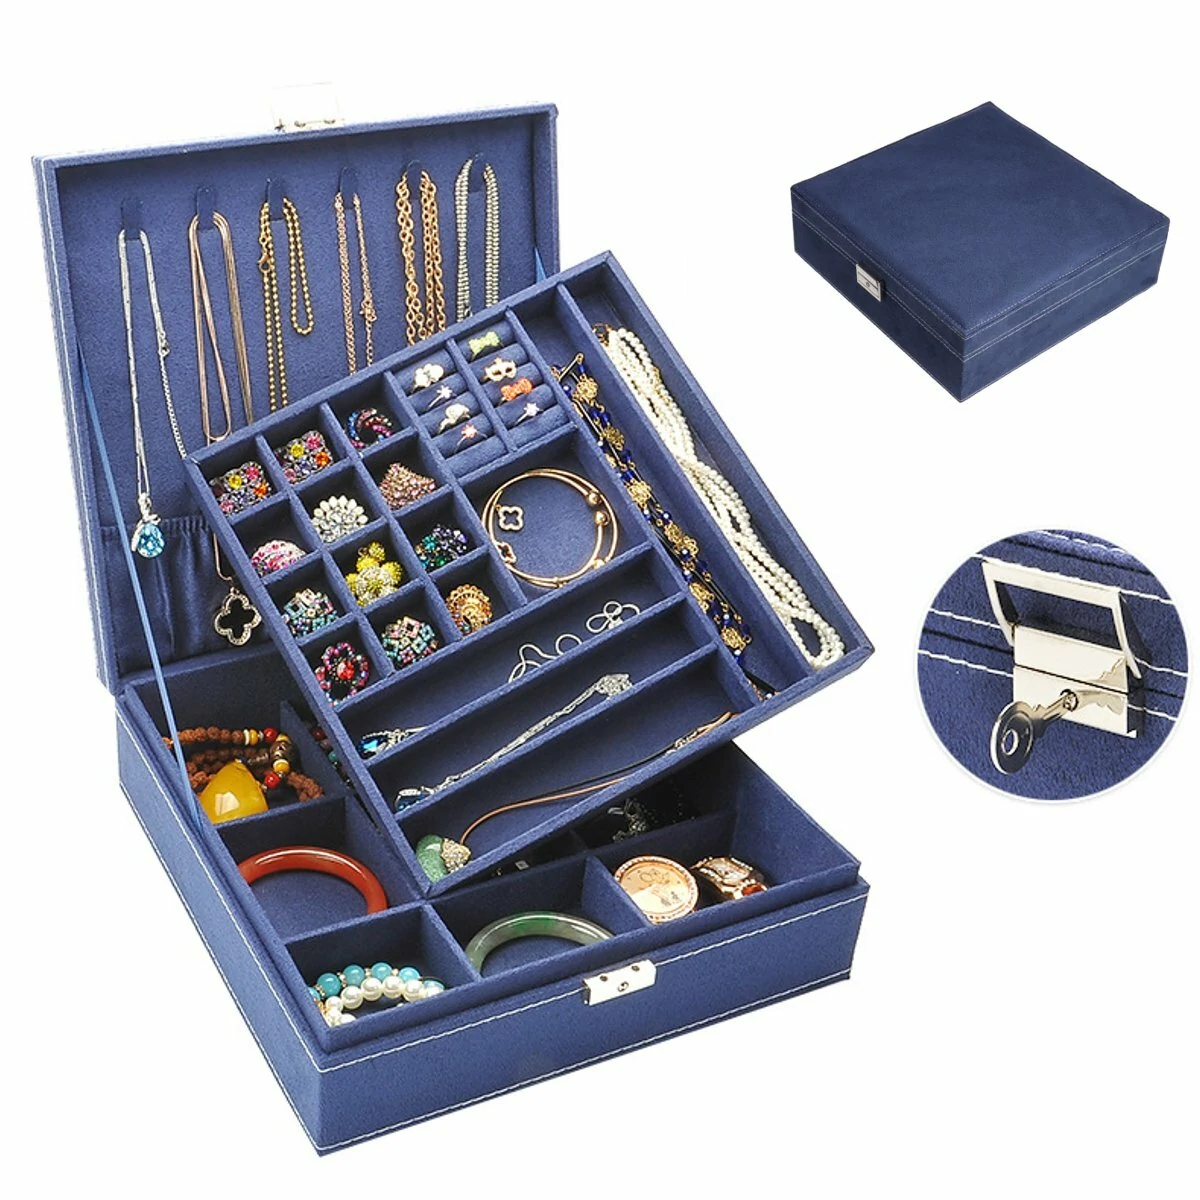 Multi-function vintage jewelry box organizers two-layer lockable jewelry display storage case